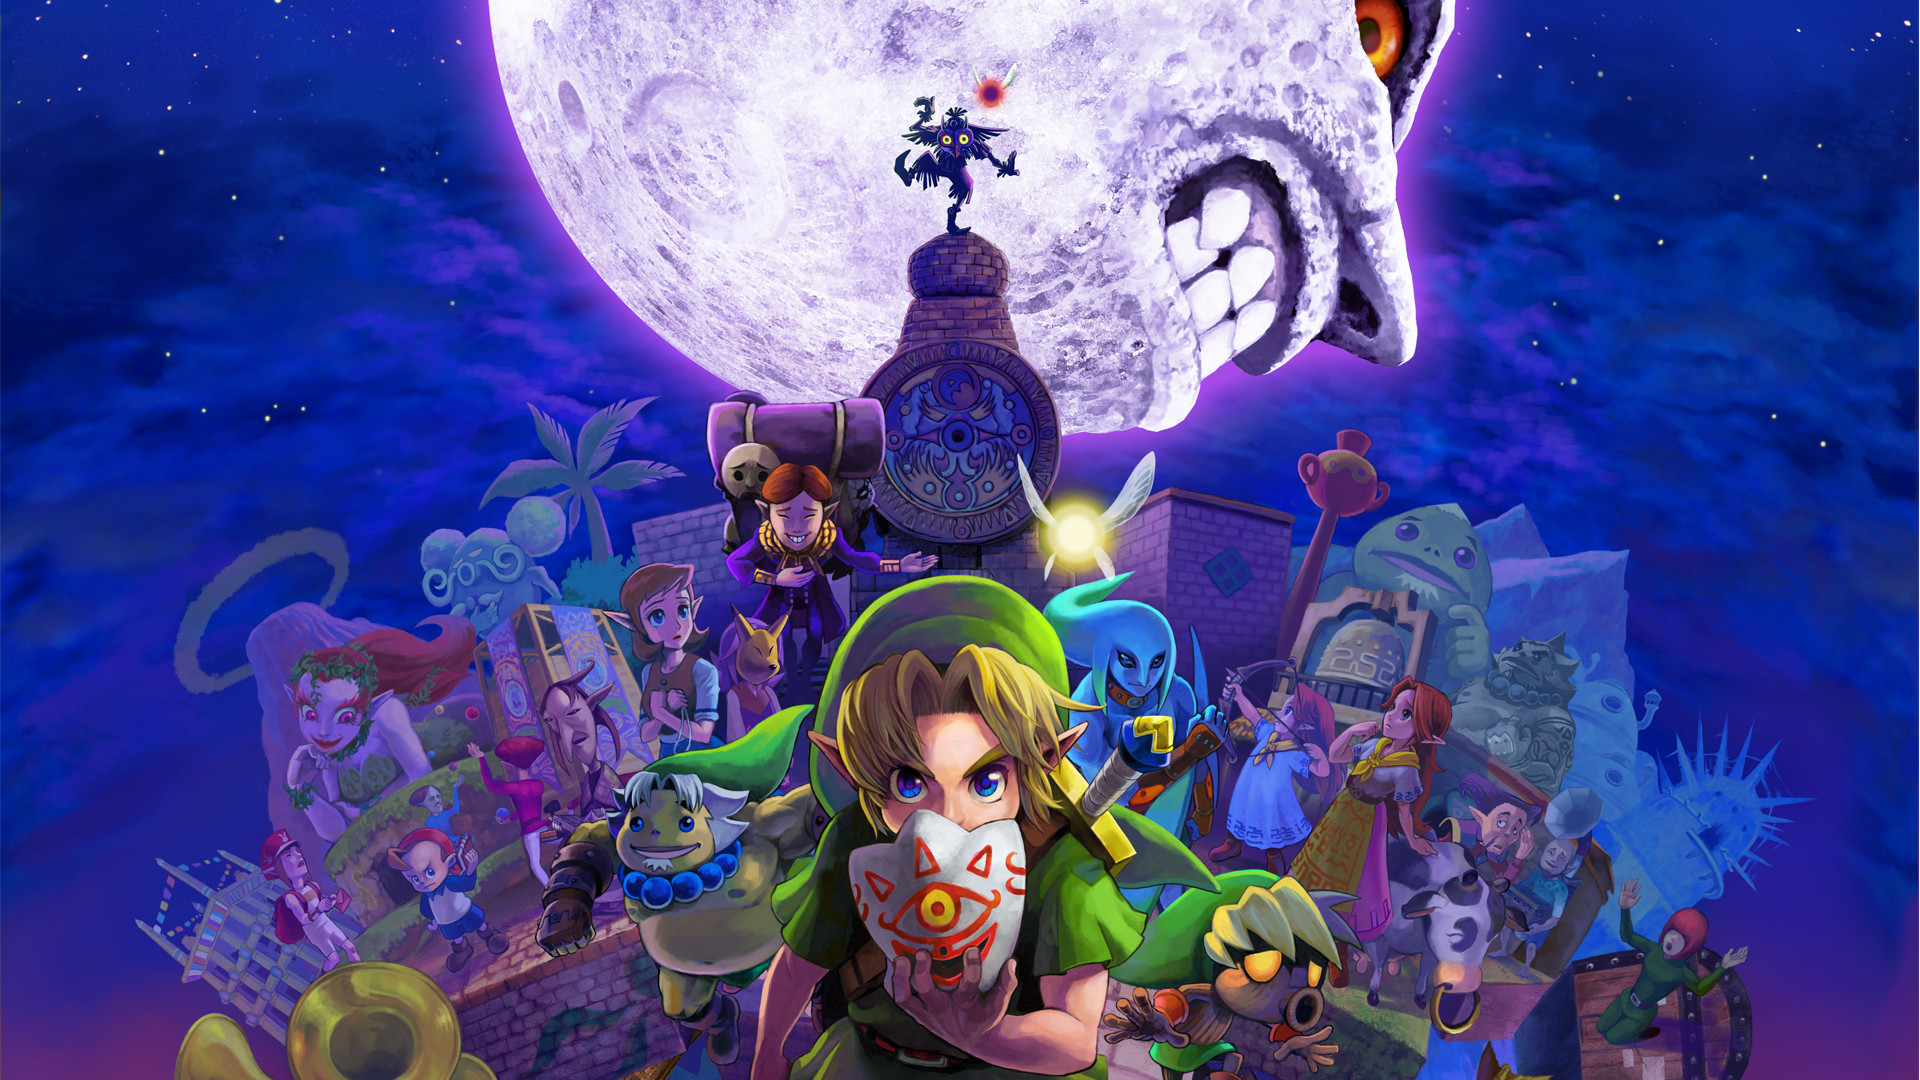 majora's mask ds offers limited edition figurine new england gamer